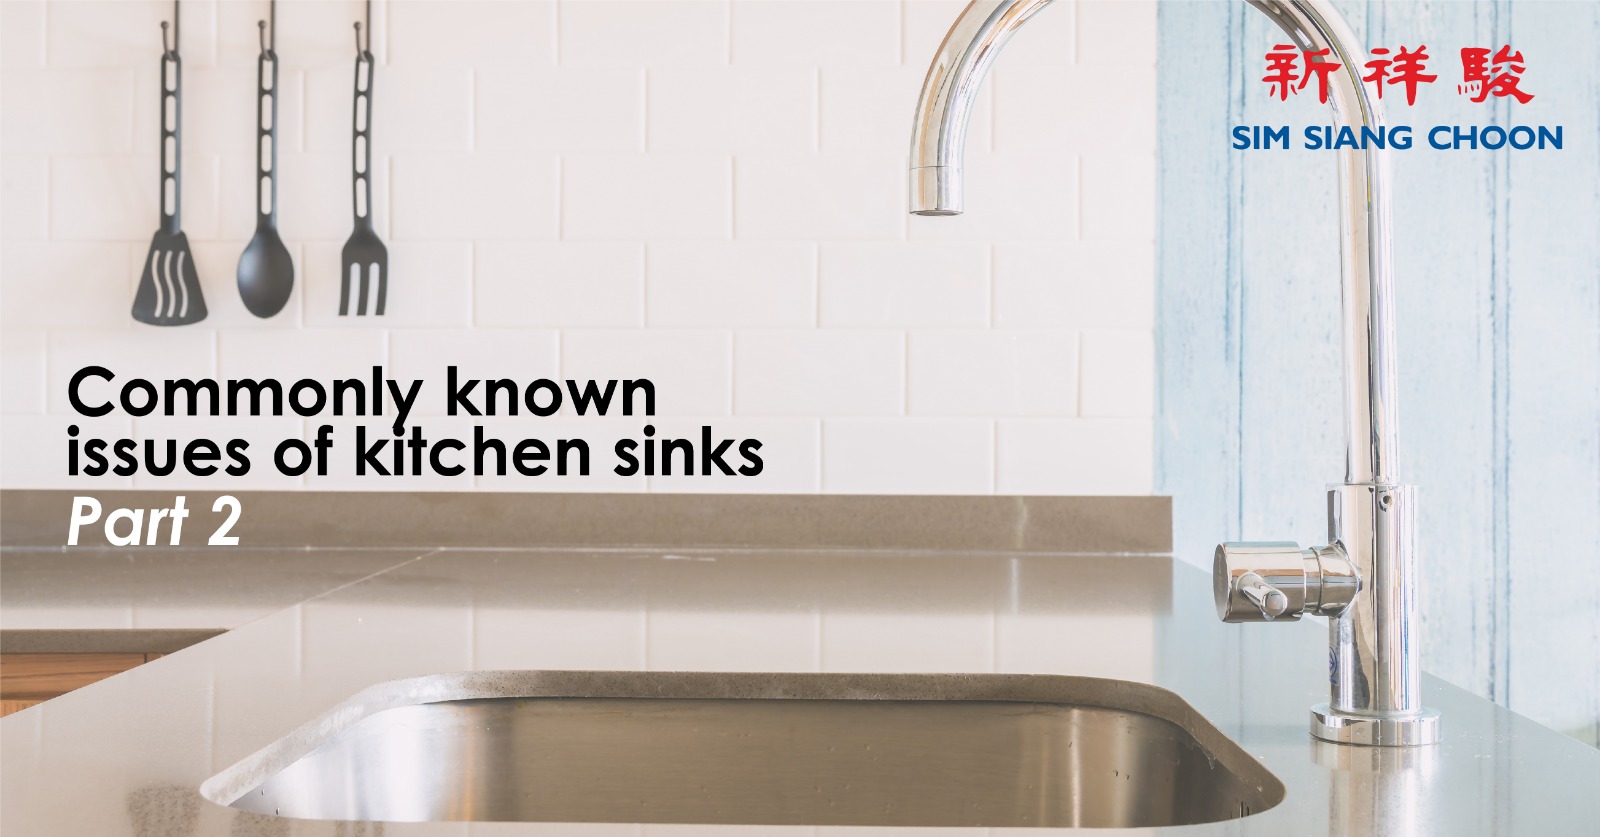 COMMONLY KNOWN ISSUES OF KITCHEN SINKS - PART 2